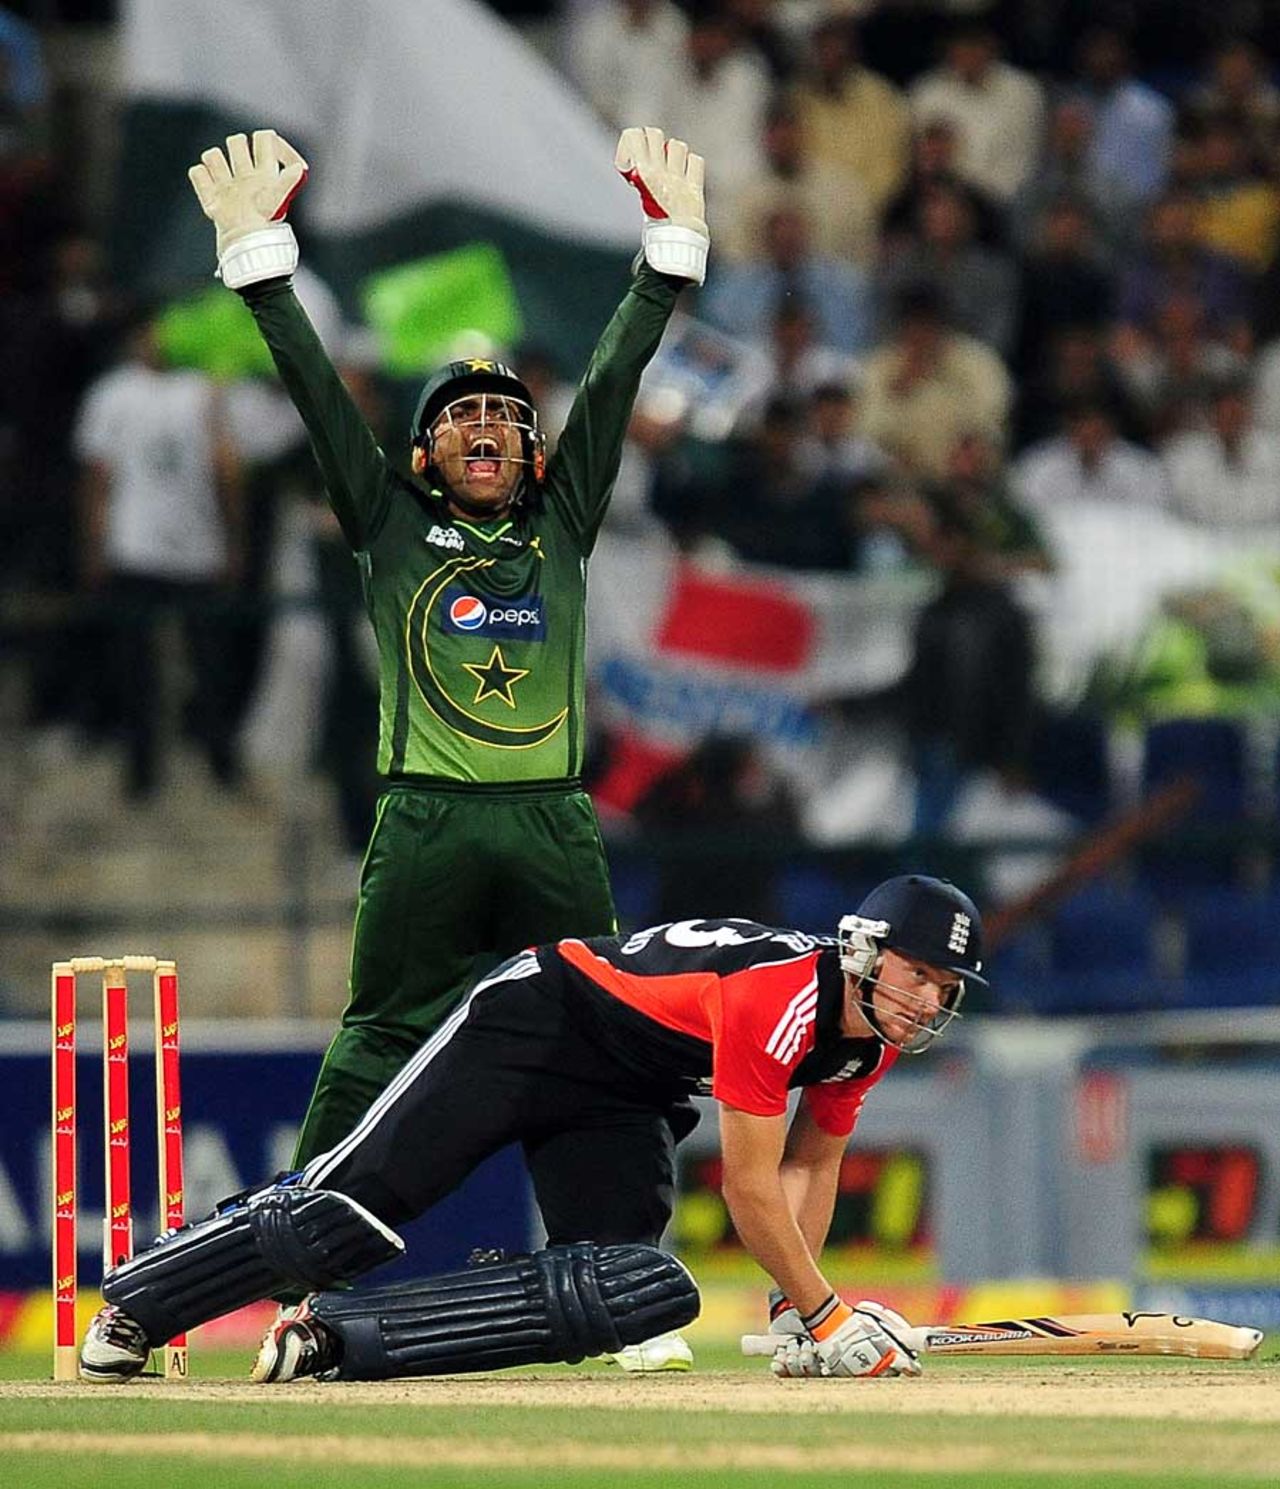 Jos Buttler ended up on his knees when given lbw, Pakistan v England, 3rd Twenty20, Abu Dhabi, February 27, 2012